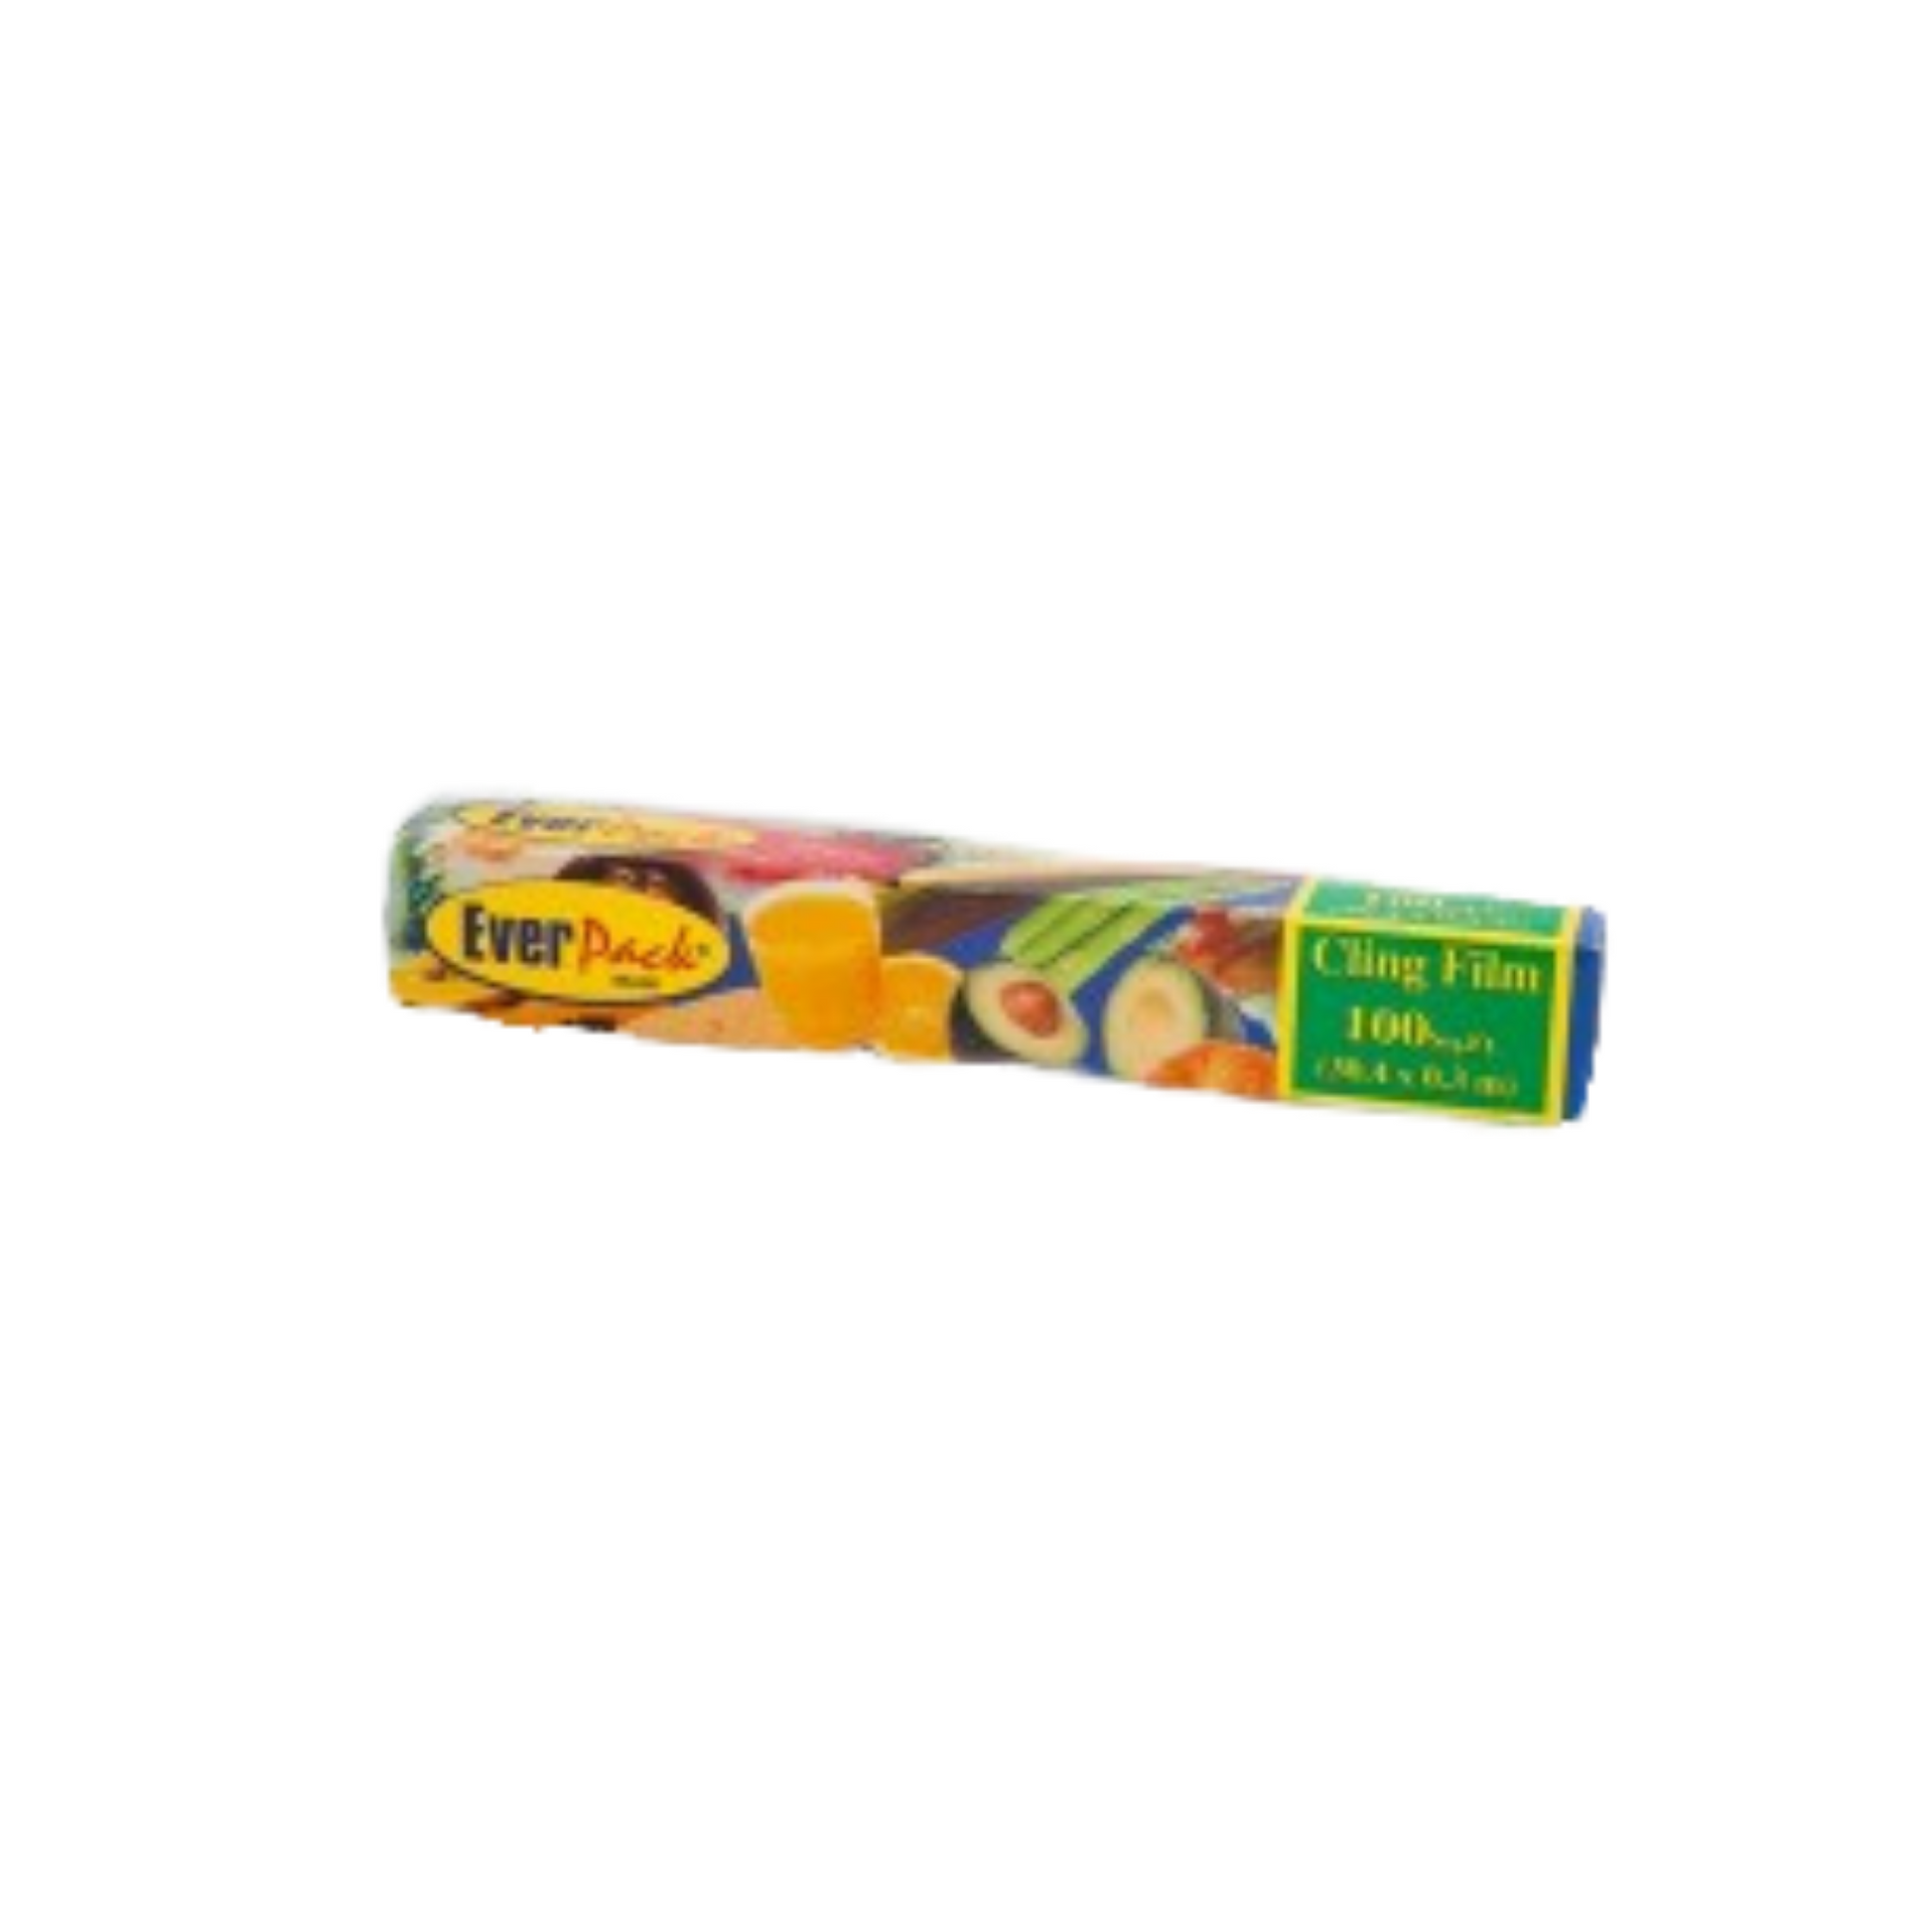 a pack of ever pack cling film 